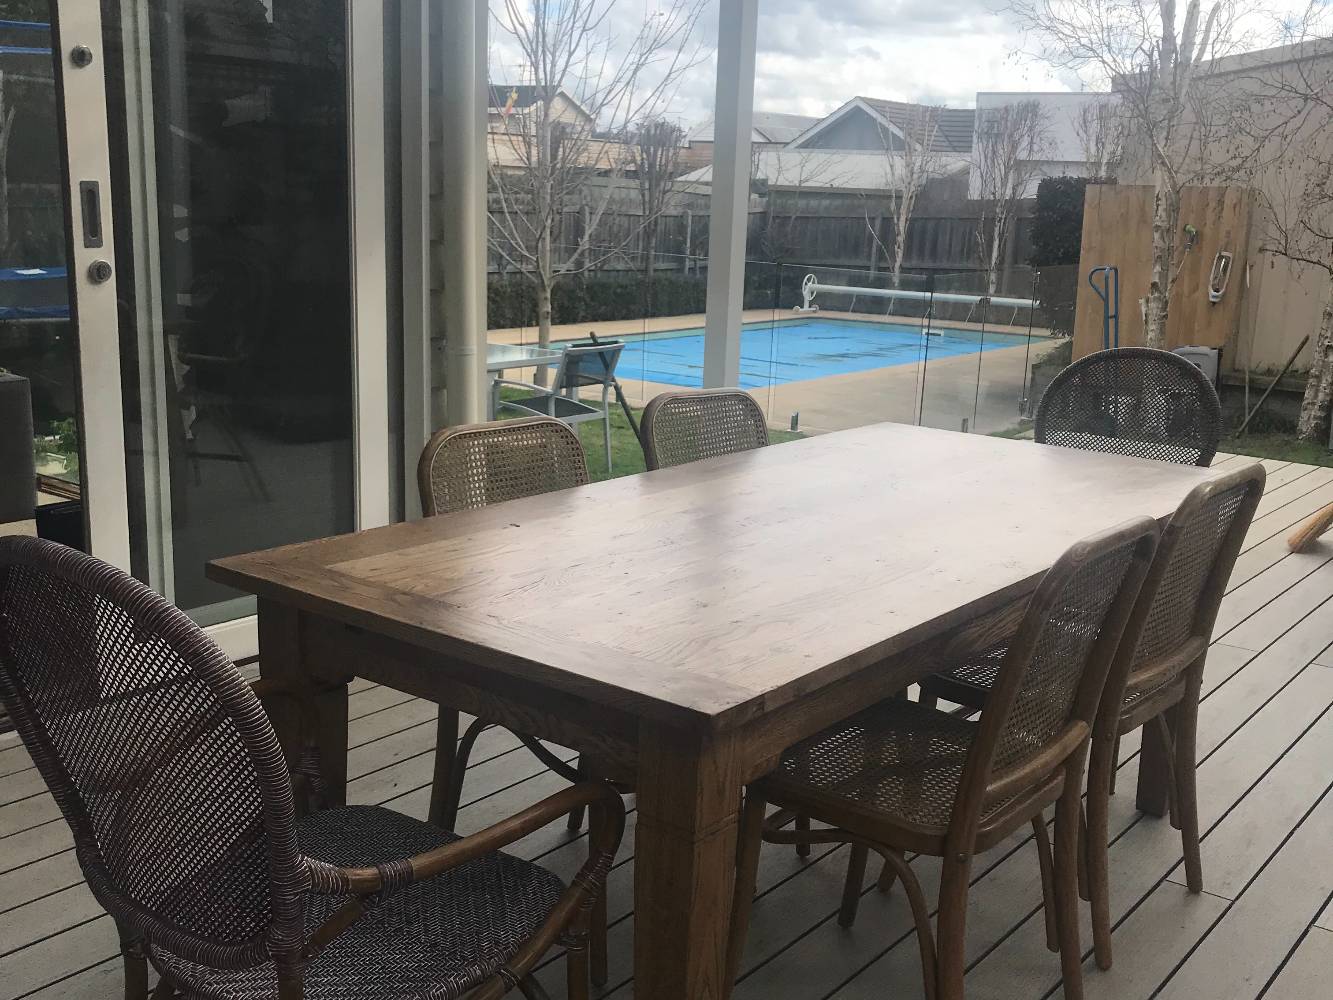 New out door deck. Table can be extended to seat 12 ppl.photo taken in winter. Trees block view of neighbouring houses during Spring/Summer. See earlier pool photo.